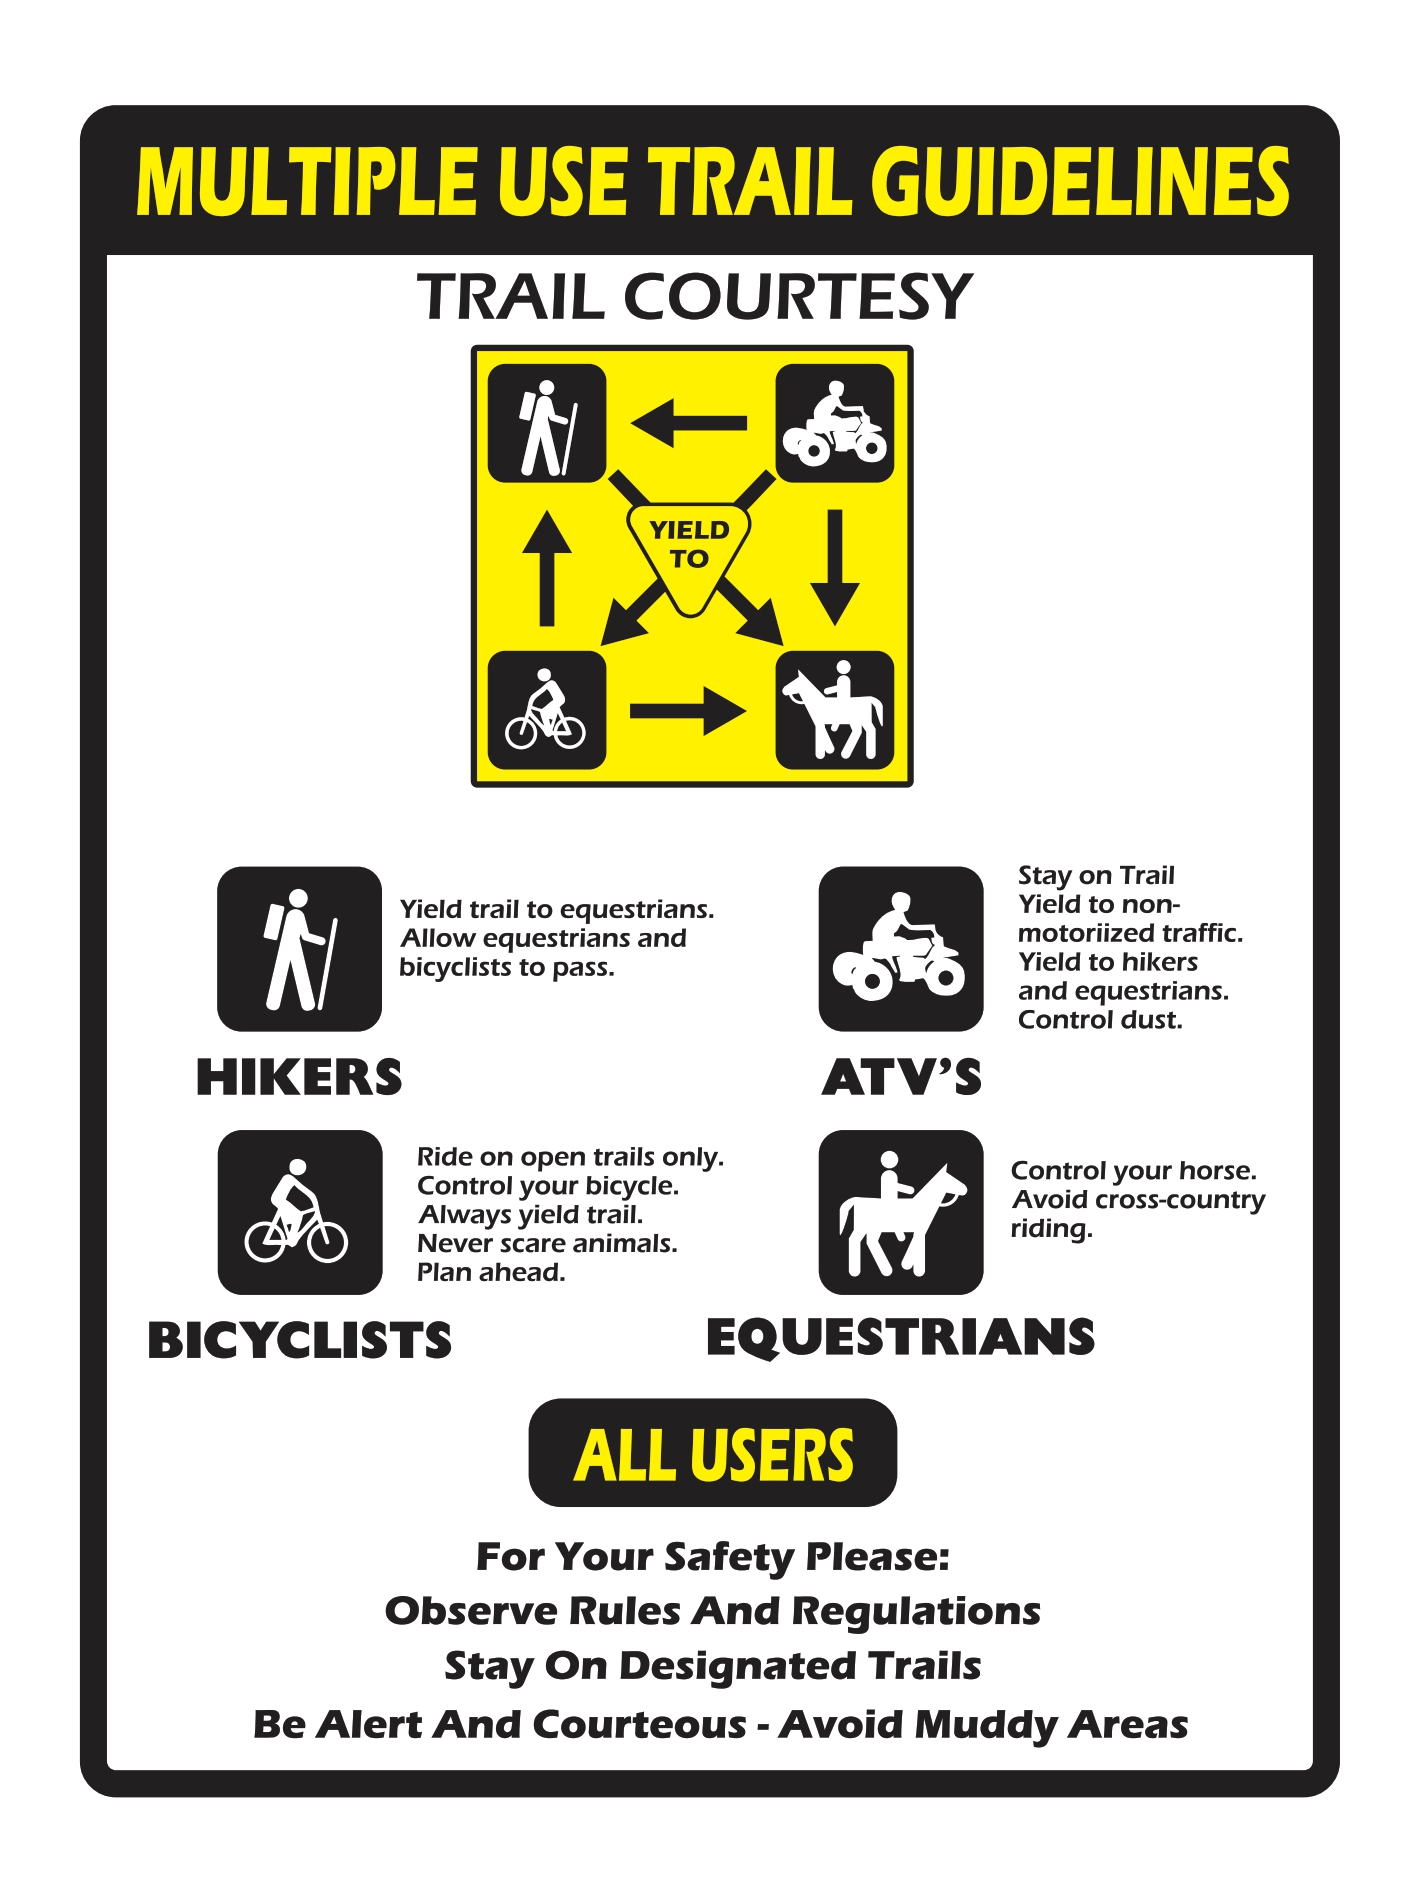 Poster outlining the multiple use trail guidelines trail courtesy